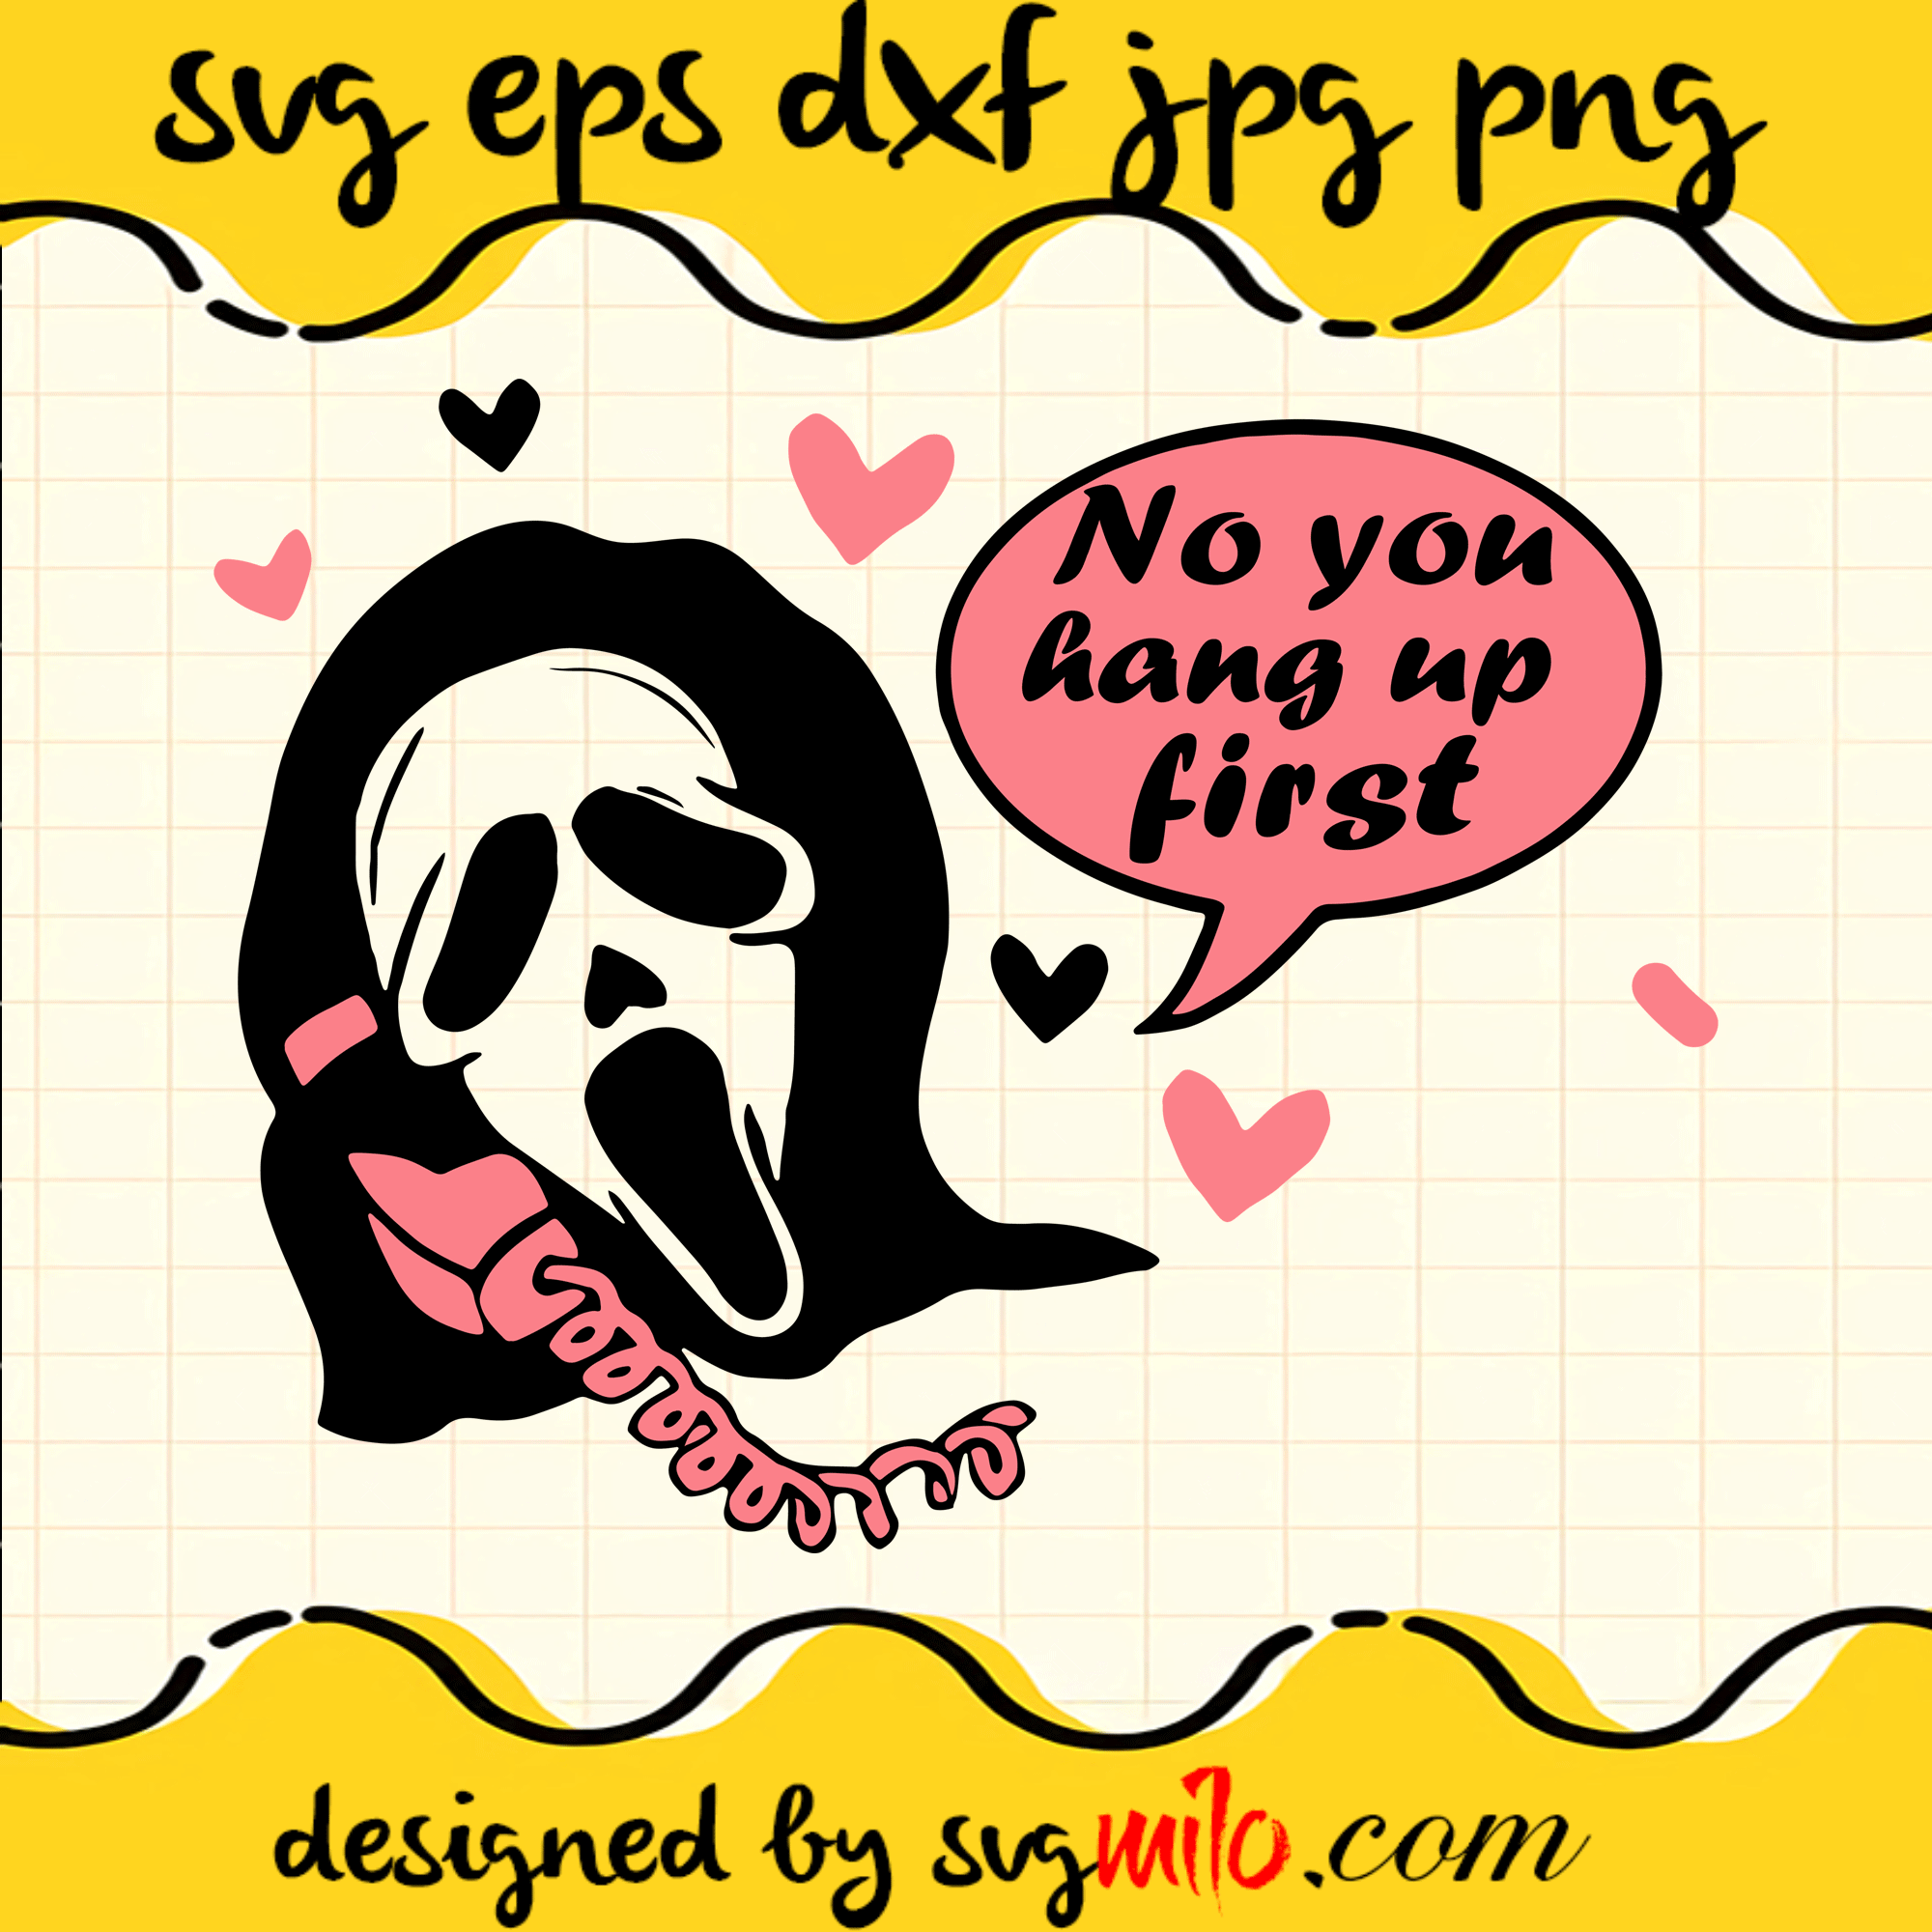 No You Hang Up First SVG, Scream Ghost SVG, Halloween SVG, EPS, PNG, DXF, Premium Quality - SVGMILO